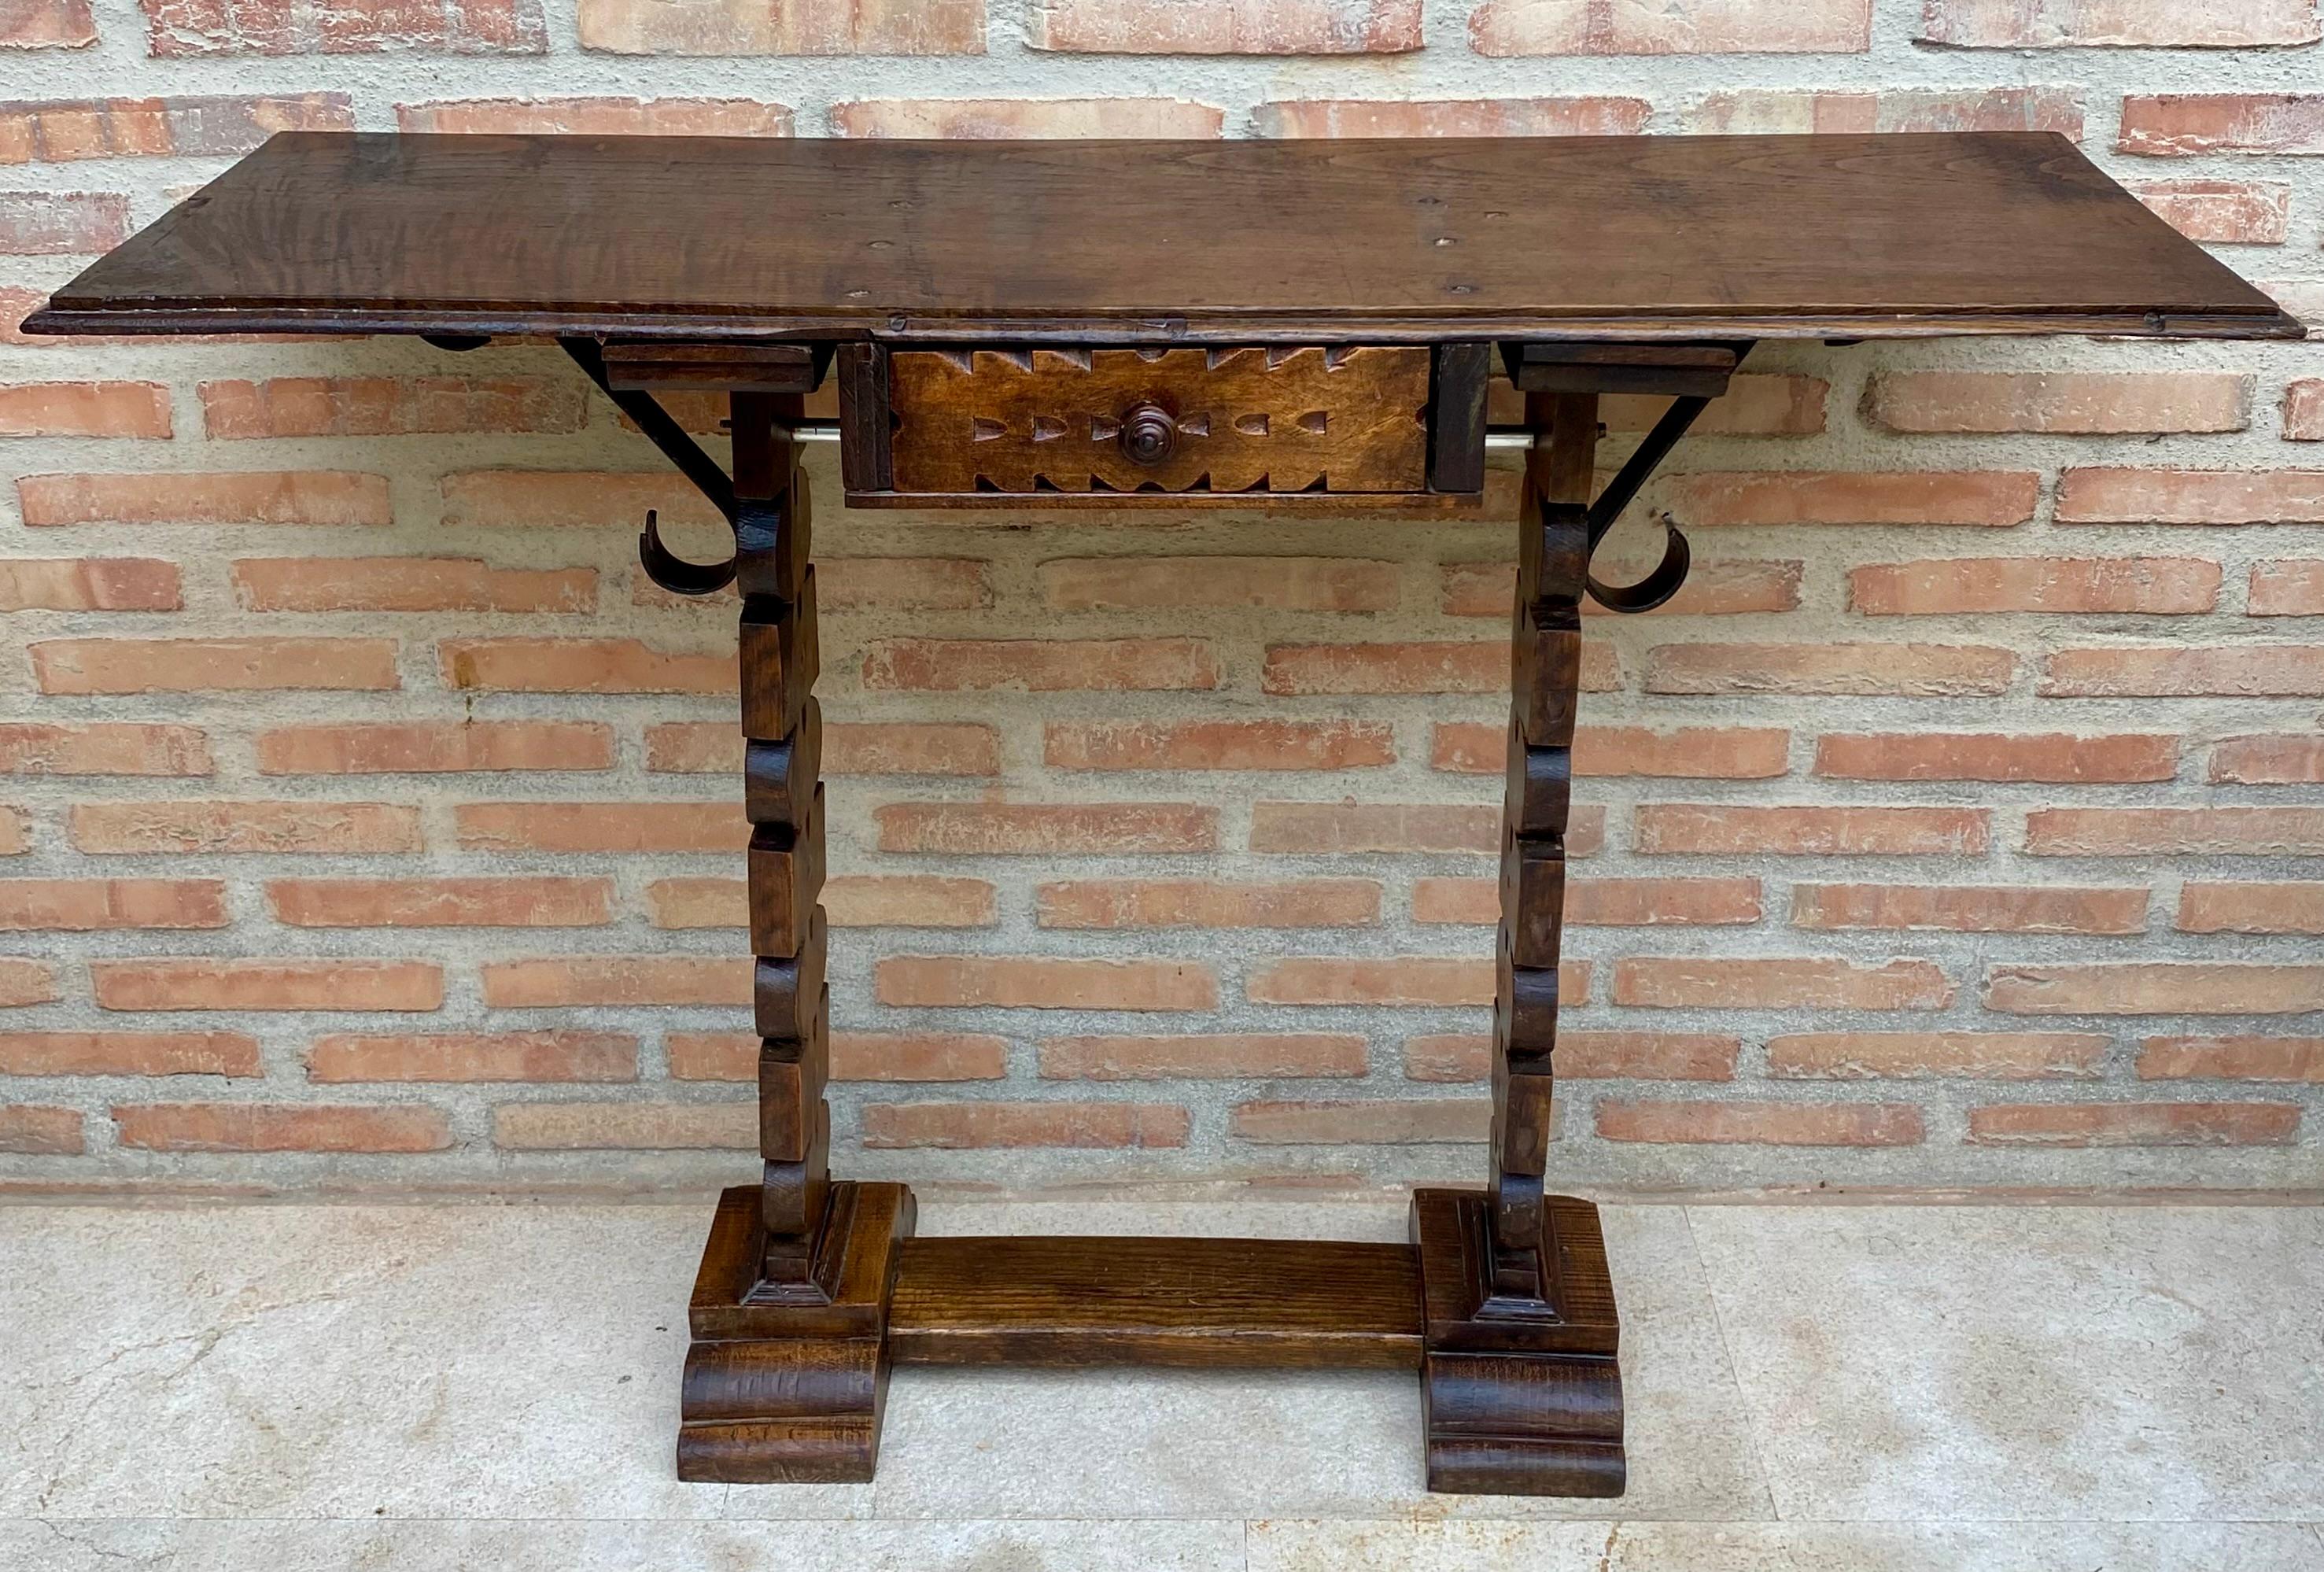 
Early 20th century Spanish Console Table with One Drawer. Early 20th Spanish console table with two pedestal legs joined by a carved bar stretcher.